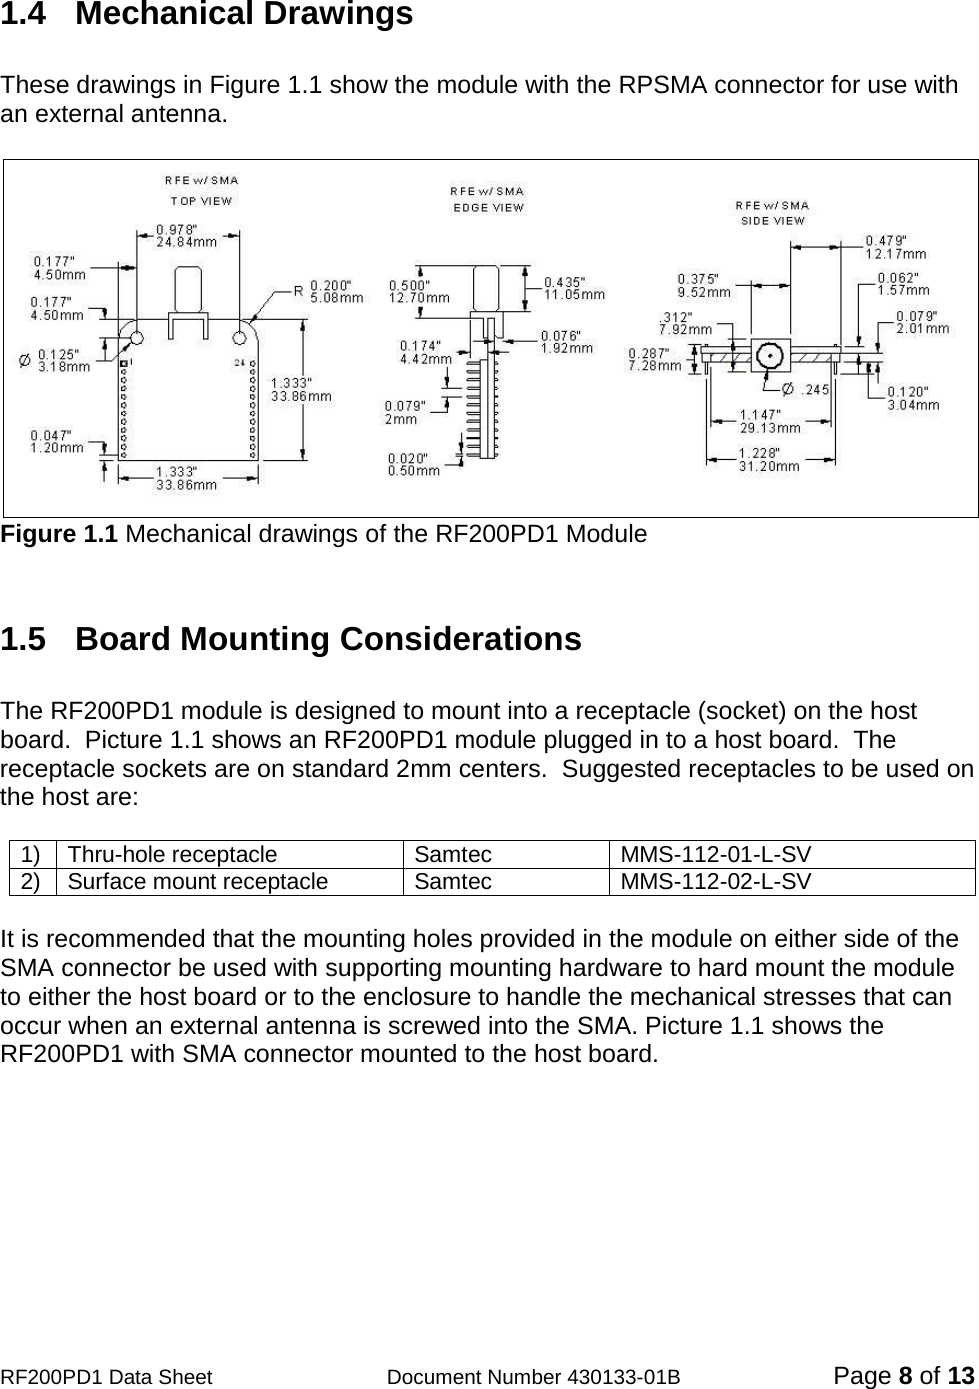                                            RF200PD1 Data Sheet                  Document Number 430133-01B  Page 8 of 13  1.4   Mechanical Drawings    These drawings in Figure 1.1 show the module with the RPSMA connector for use with an external antenna.   Figure 1.1 Mechanical drawings of the RF200PD1 Module   1.5  Board Mounting Considerations  The RF200PD1 module is designed to mount into a receptacle (socket) on the host board.  Picture 1.1 shows an RF200PD1 module plugged in to a host board.  The receptacle sockets are on standard 2mm centers.  Suggested receptacles to be used on the host are:  1) Thru-hole receptacle Samtec MMS-112-01-L-SV   2) Surface mount receptacle Samtec MMS-112-02-L-SV  It is recommended that the mounting holes provided in the module on either side of the SMA connector be used with supporting mounting hardware to hard mount the module to either the host board or to the enclosure to handle the mechanical stresses that can occur when an external antenna is screwed into the SMA. Picture 1.1 shows the RF200PD1 with SMA connector mounted to the host board.     